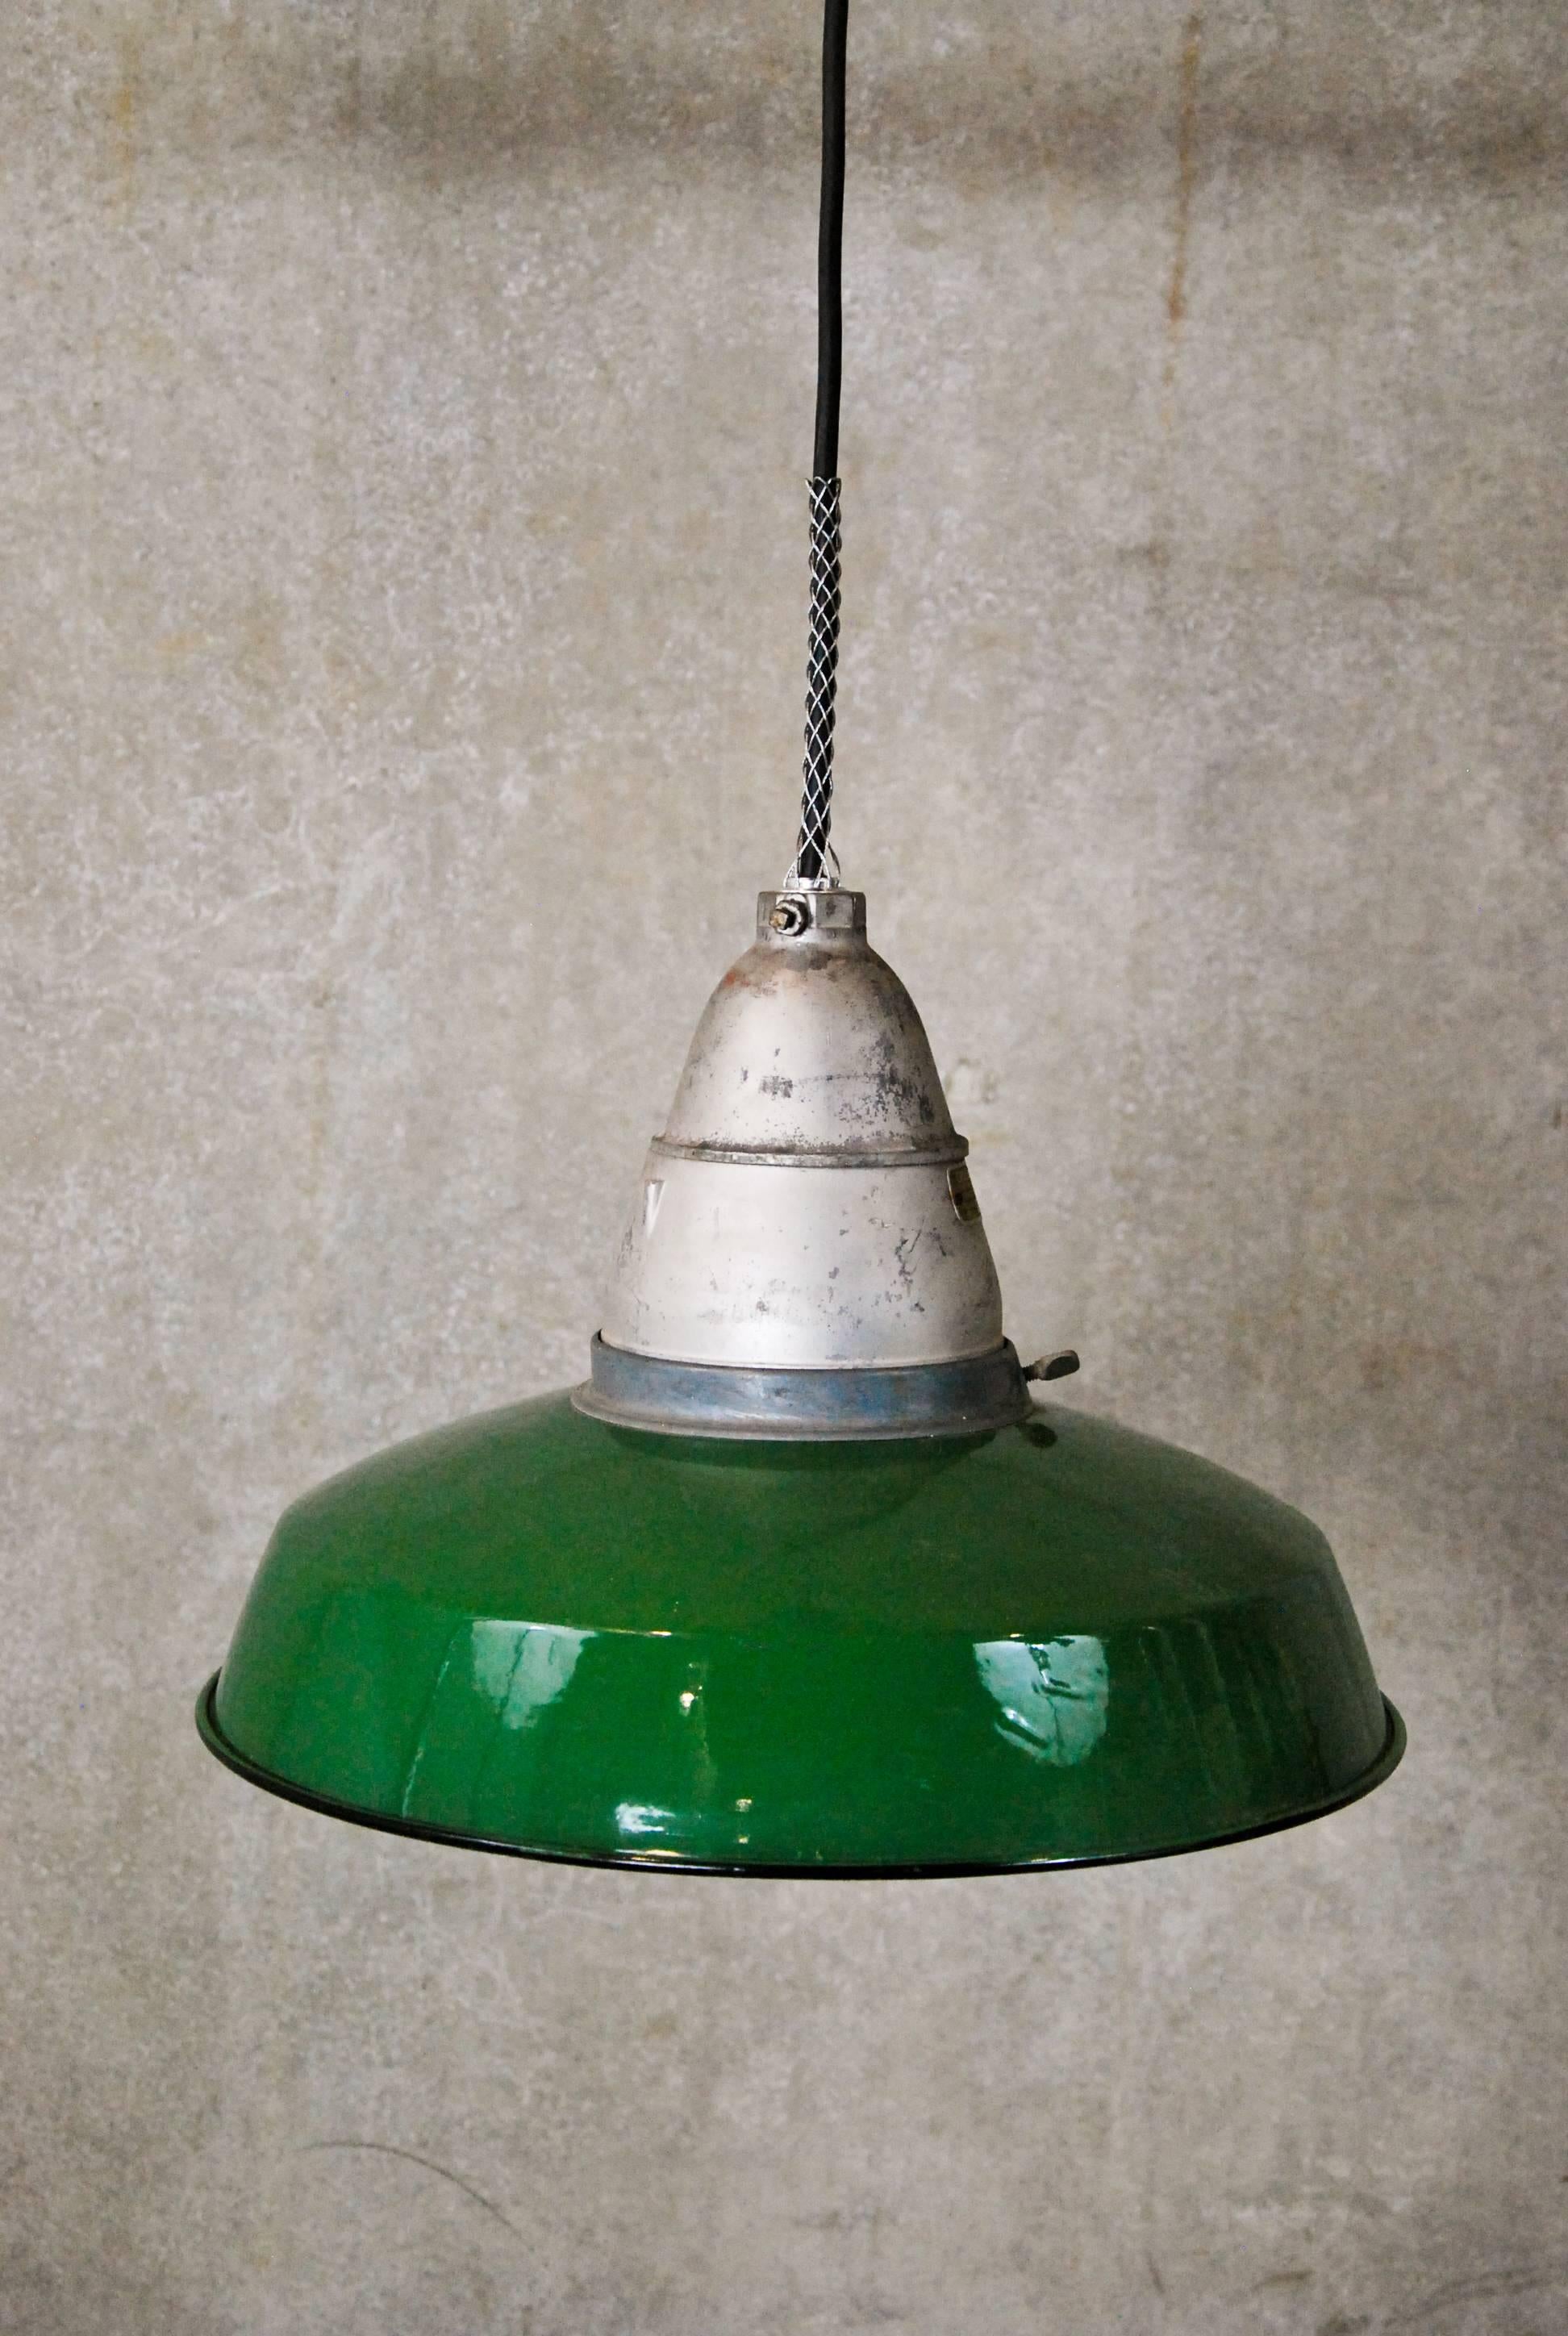 We have 20+ lights made by the Crouse Hind Co., used for industrial application in warehouses and factories.
This lights were salvaged from a factory in Chicago and have been rewired on 8 ft black cable with full CSA credential certified testing.